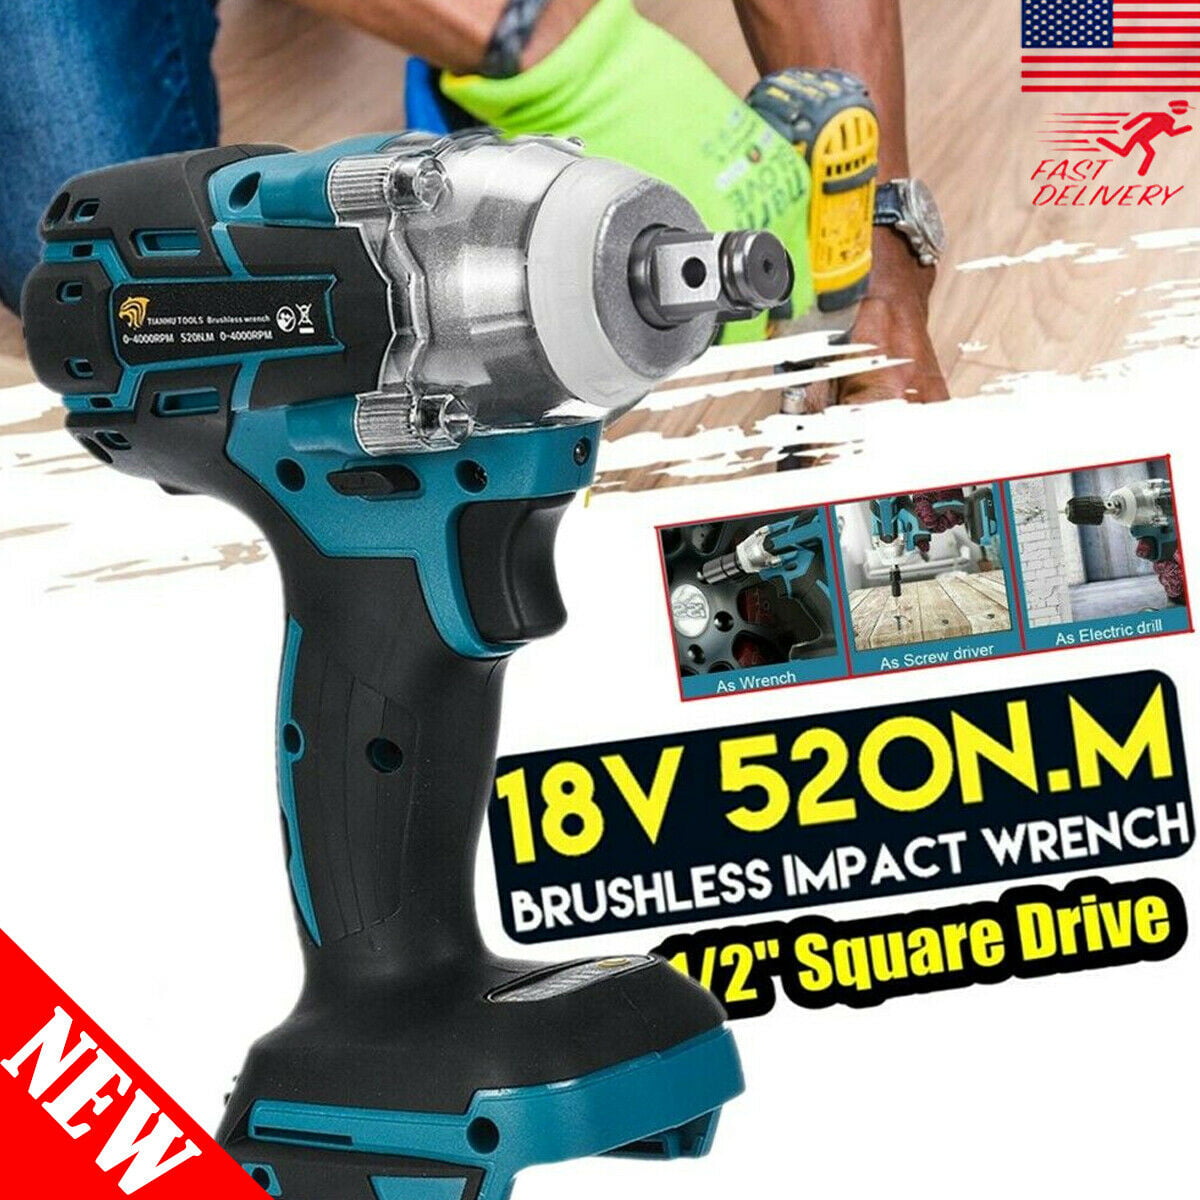 Cordless Brushless Impact Wrench 18V 520Nm 1/2" Adapted to Makita Battery DTW 